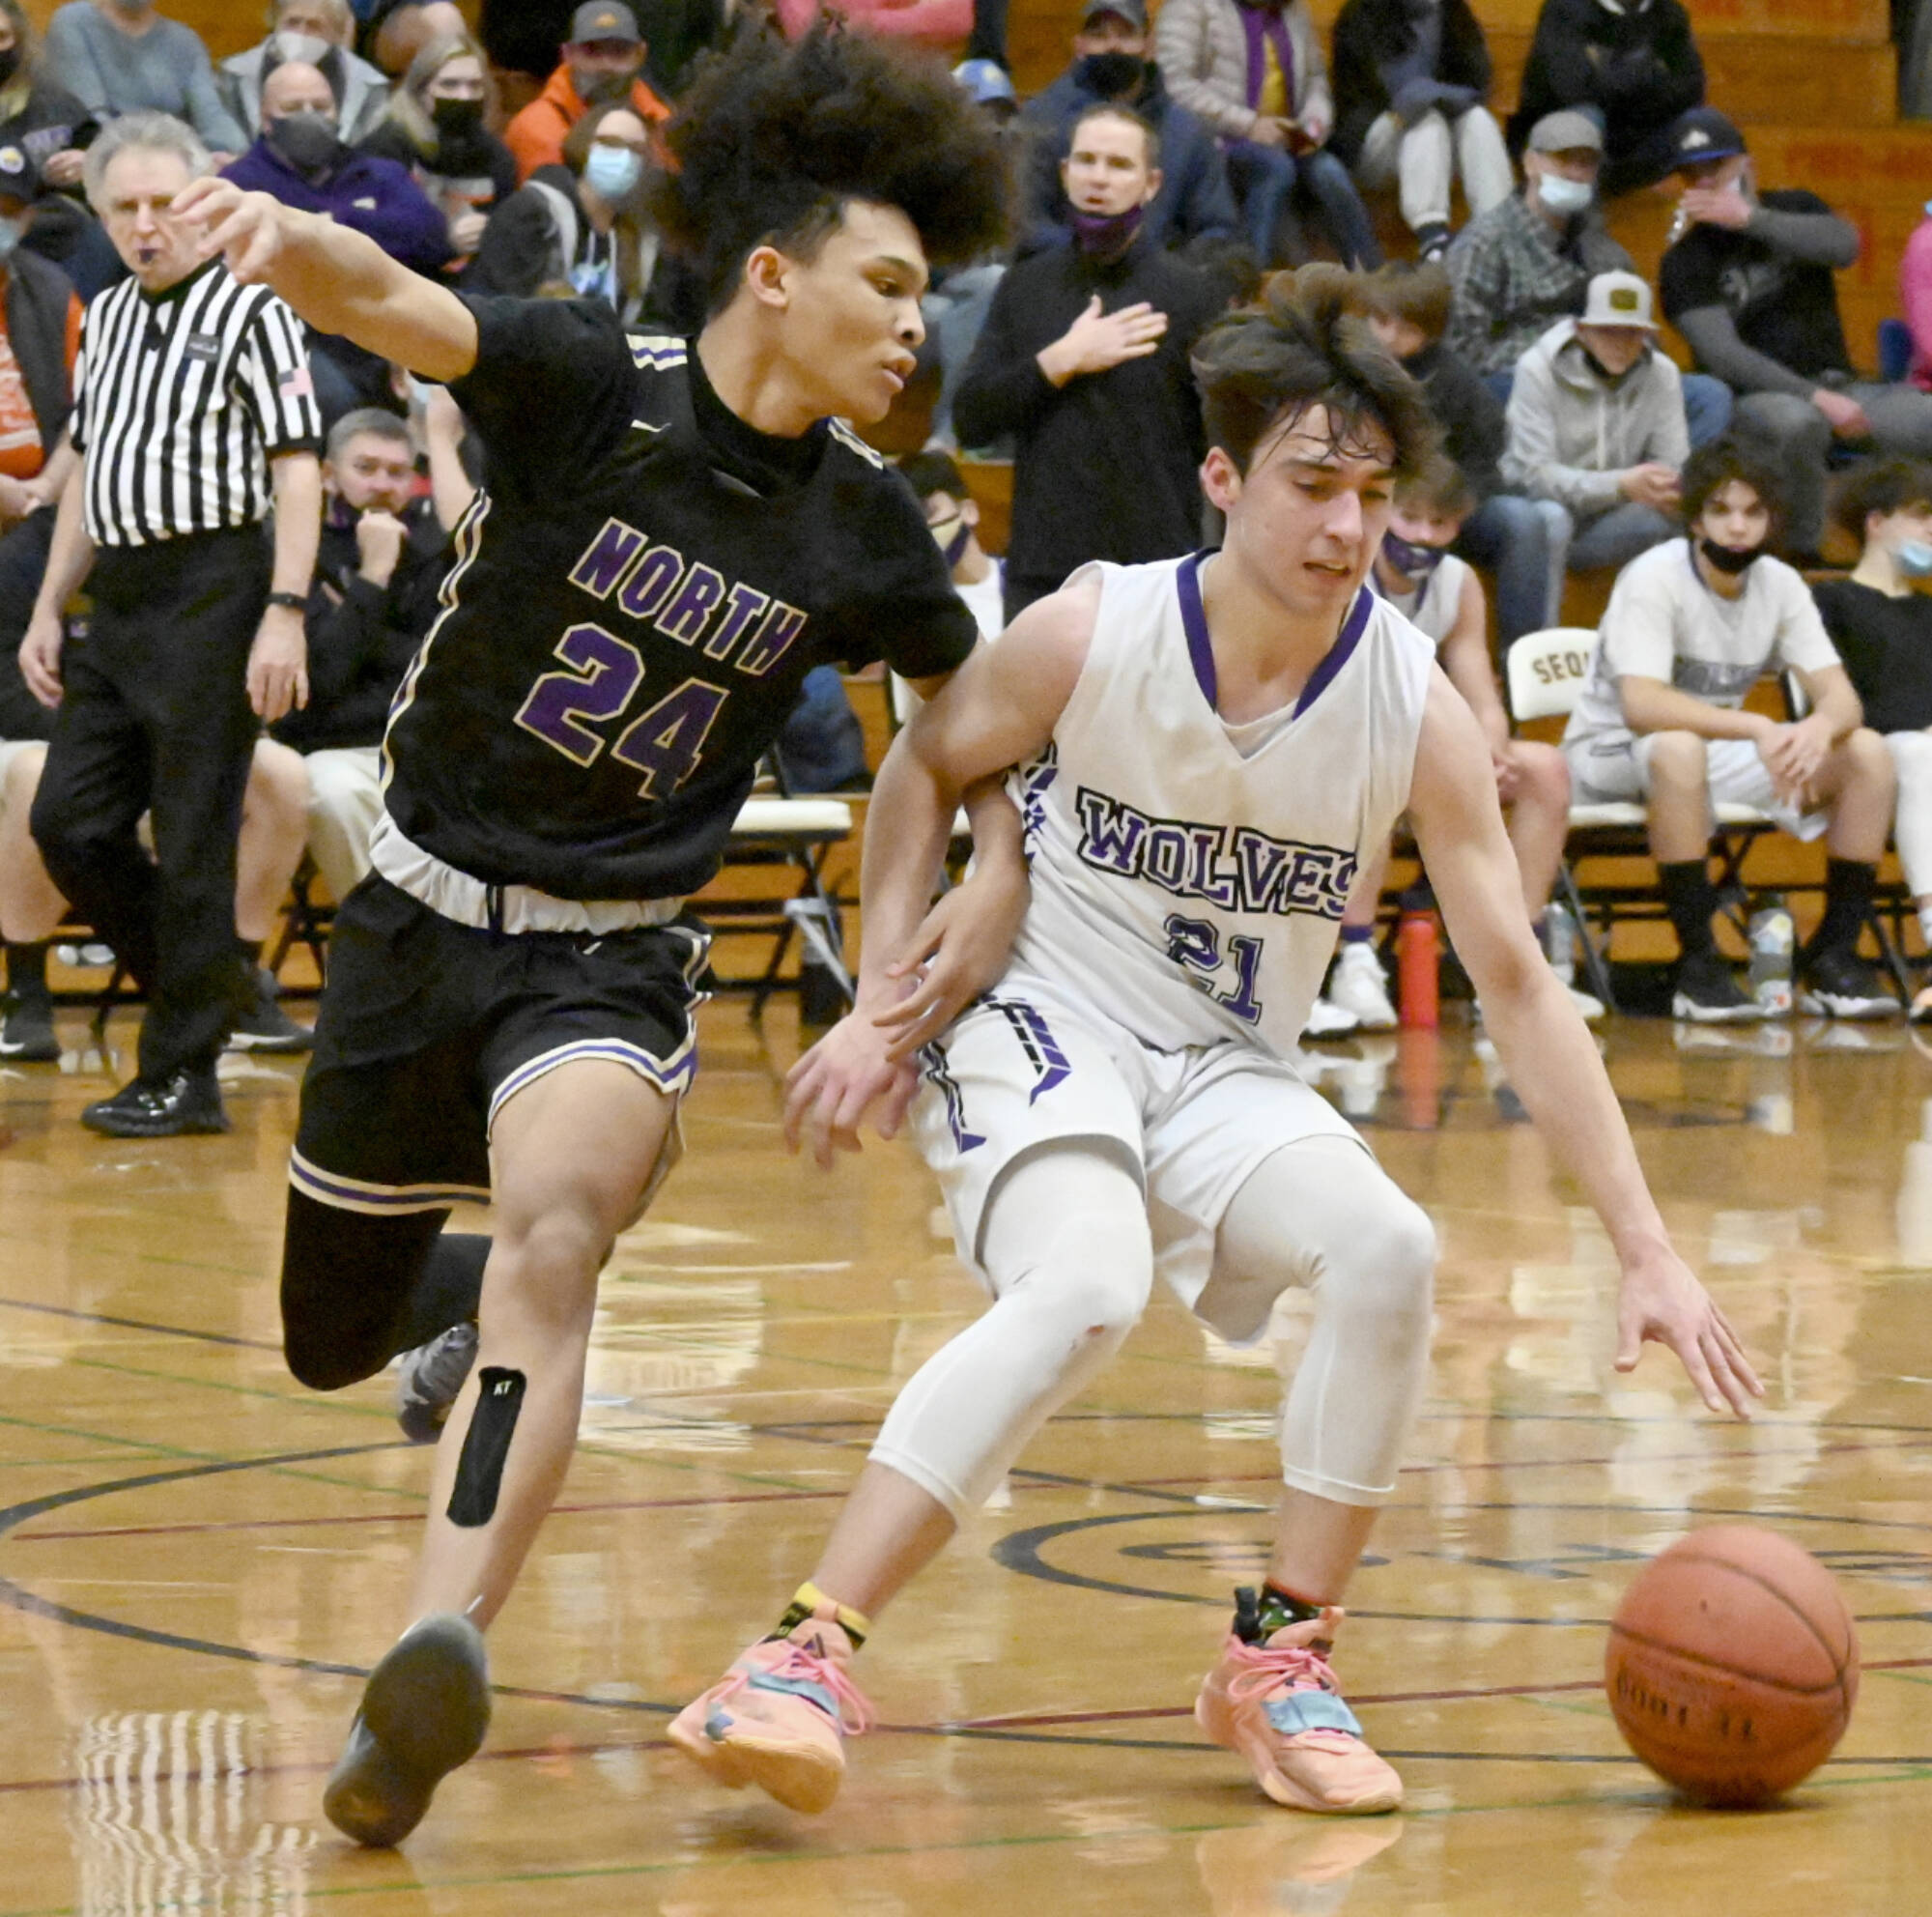 Sequim's Jaydin Possin (21) dribbles against the defense of North Kitsap's Jalen East on Thursday in Sequim. (Michael Dashiell/Olympic Peninsula News Group)